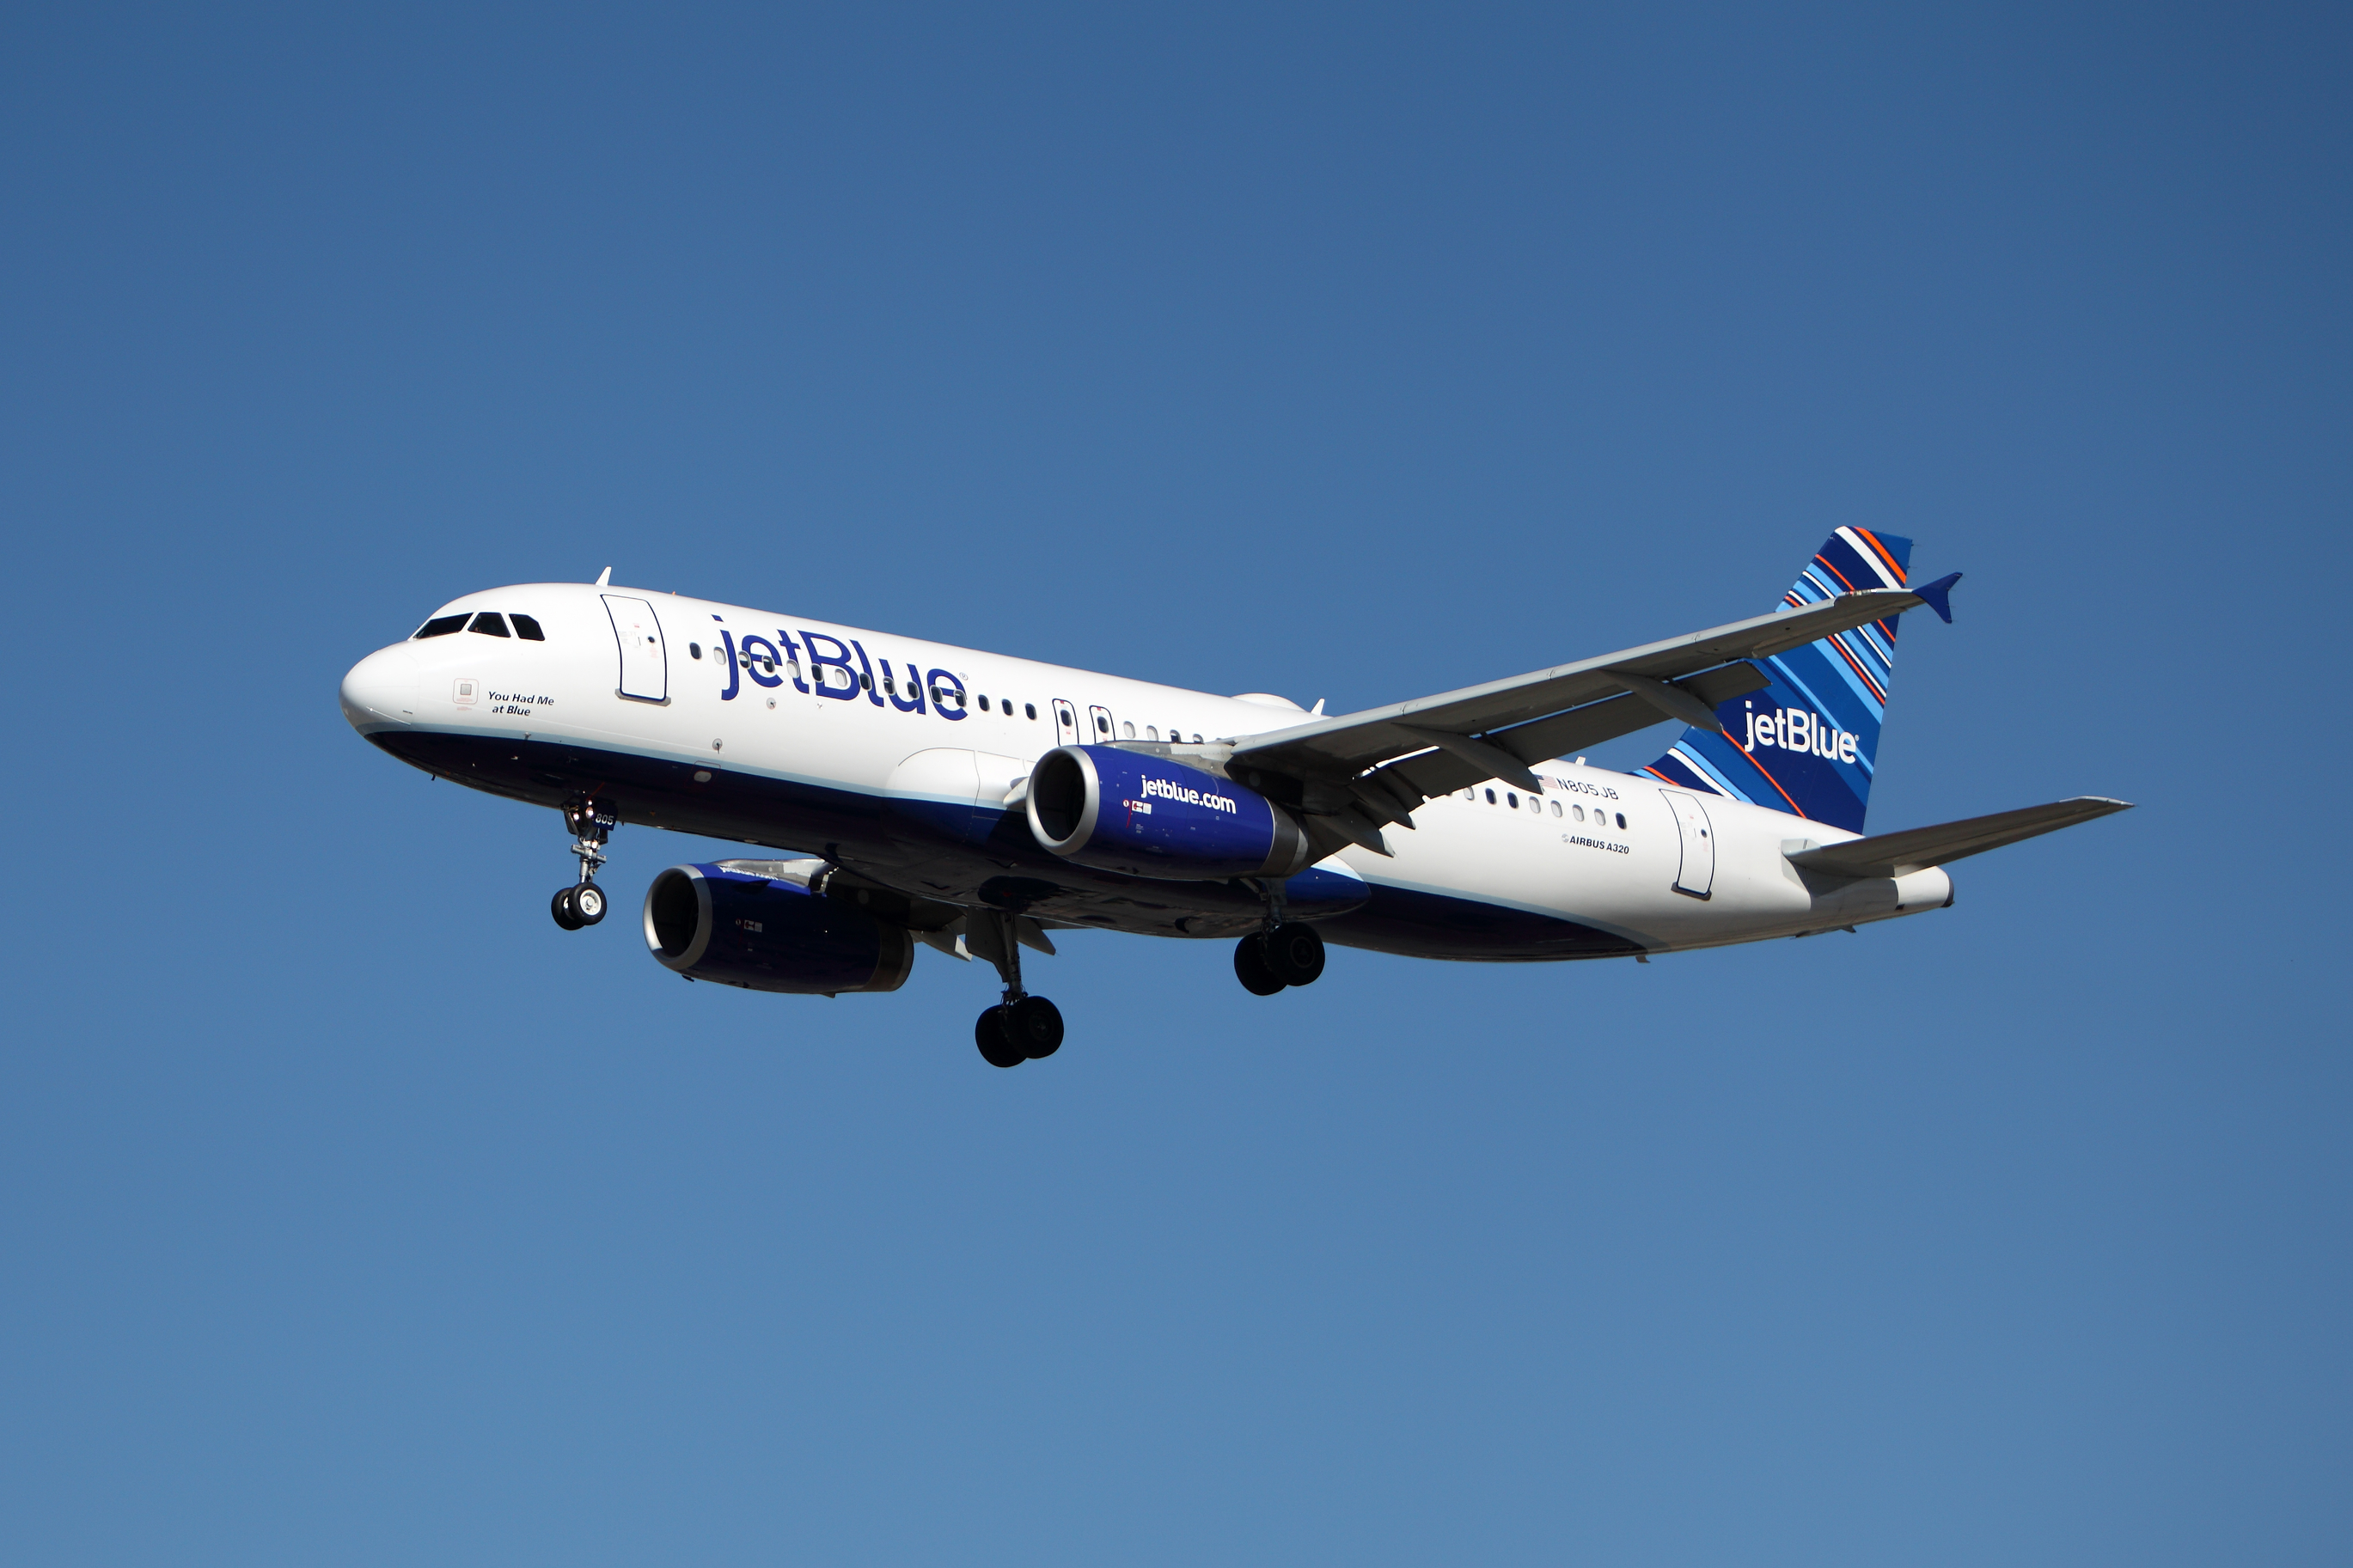 JetBlue fares from $54 one-way!